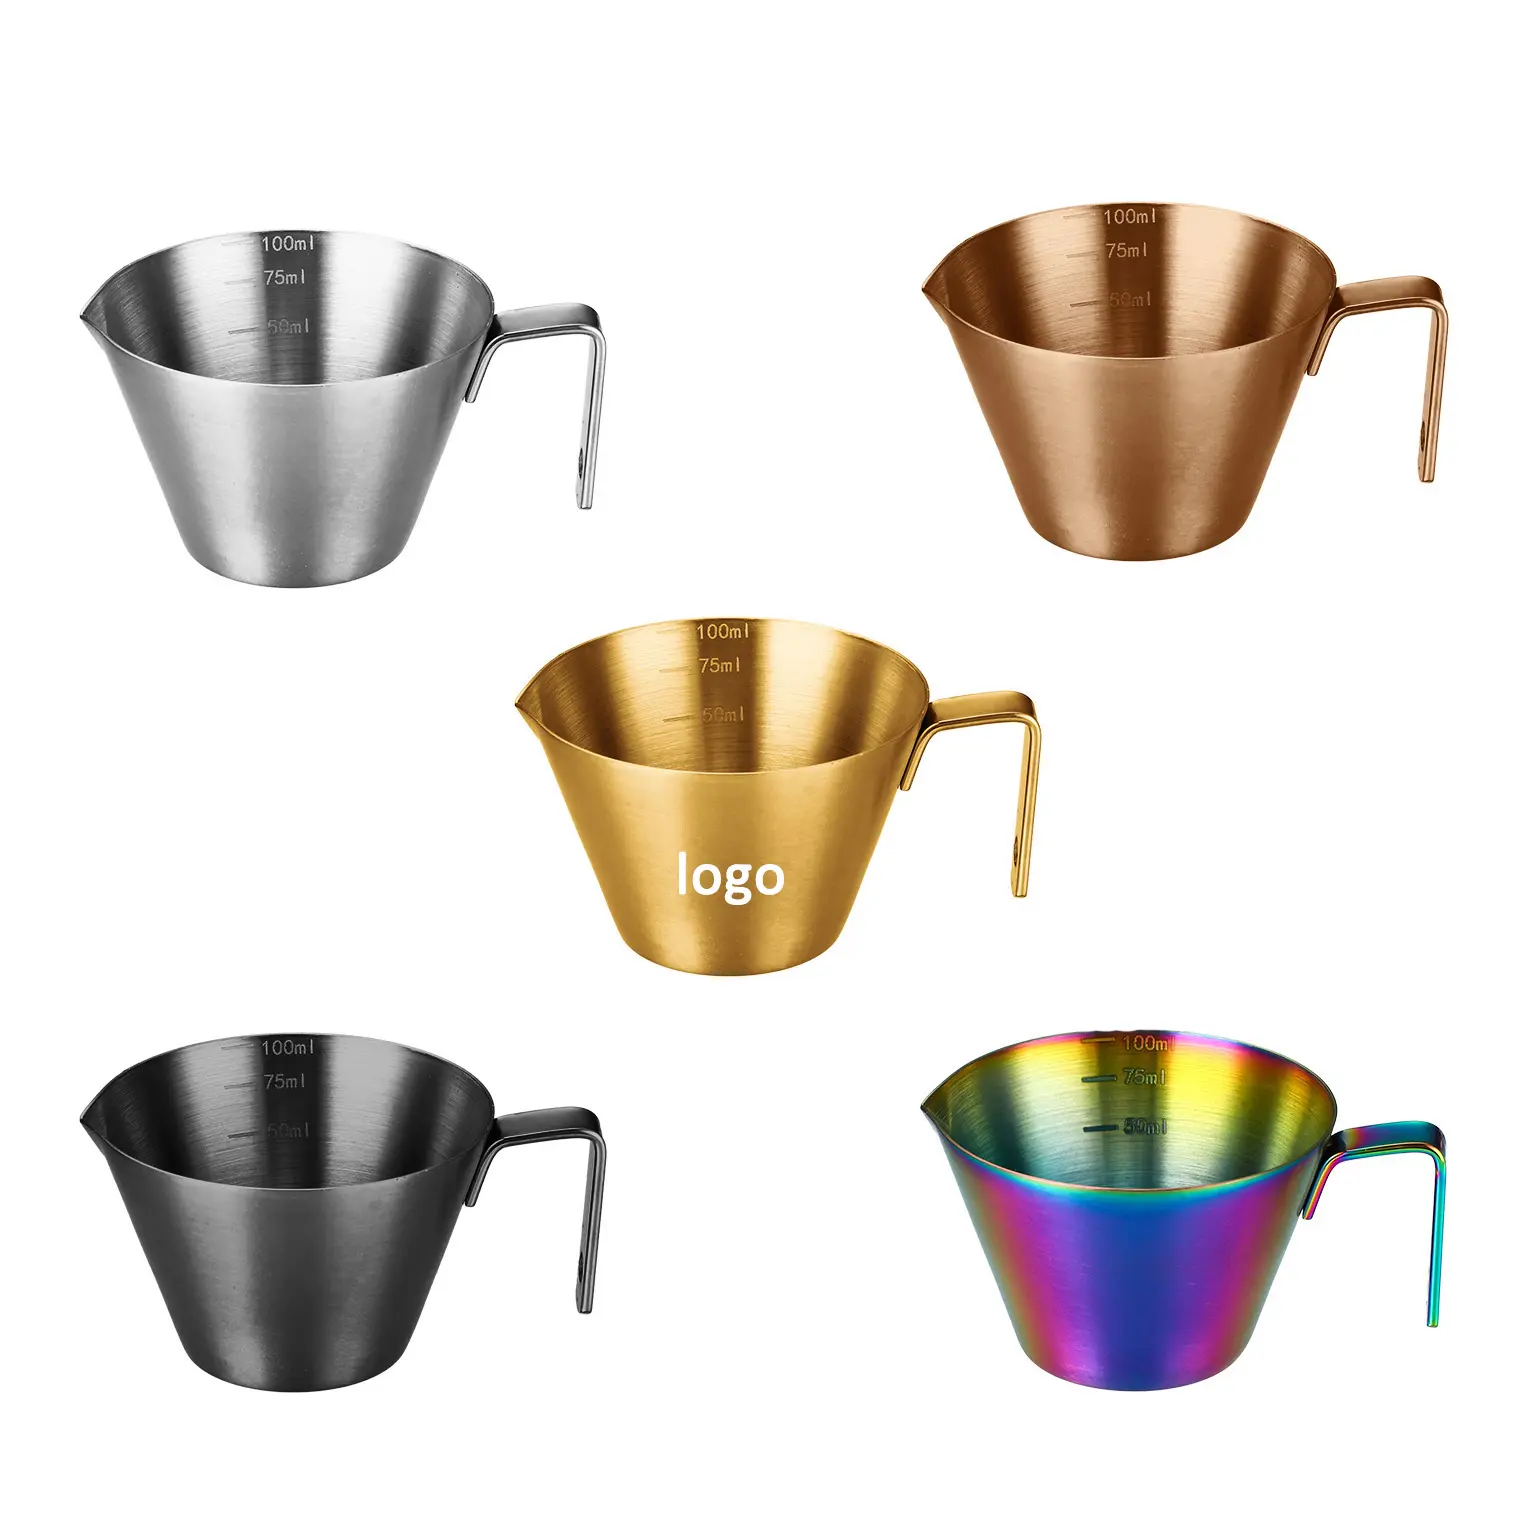 Stainless Steel Espresso Accessories, Measuring Cup with Dual Scale, Espresso Shot pitcher with V-Shaped Mouth, 3.4OZ/100ML